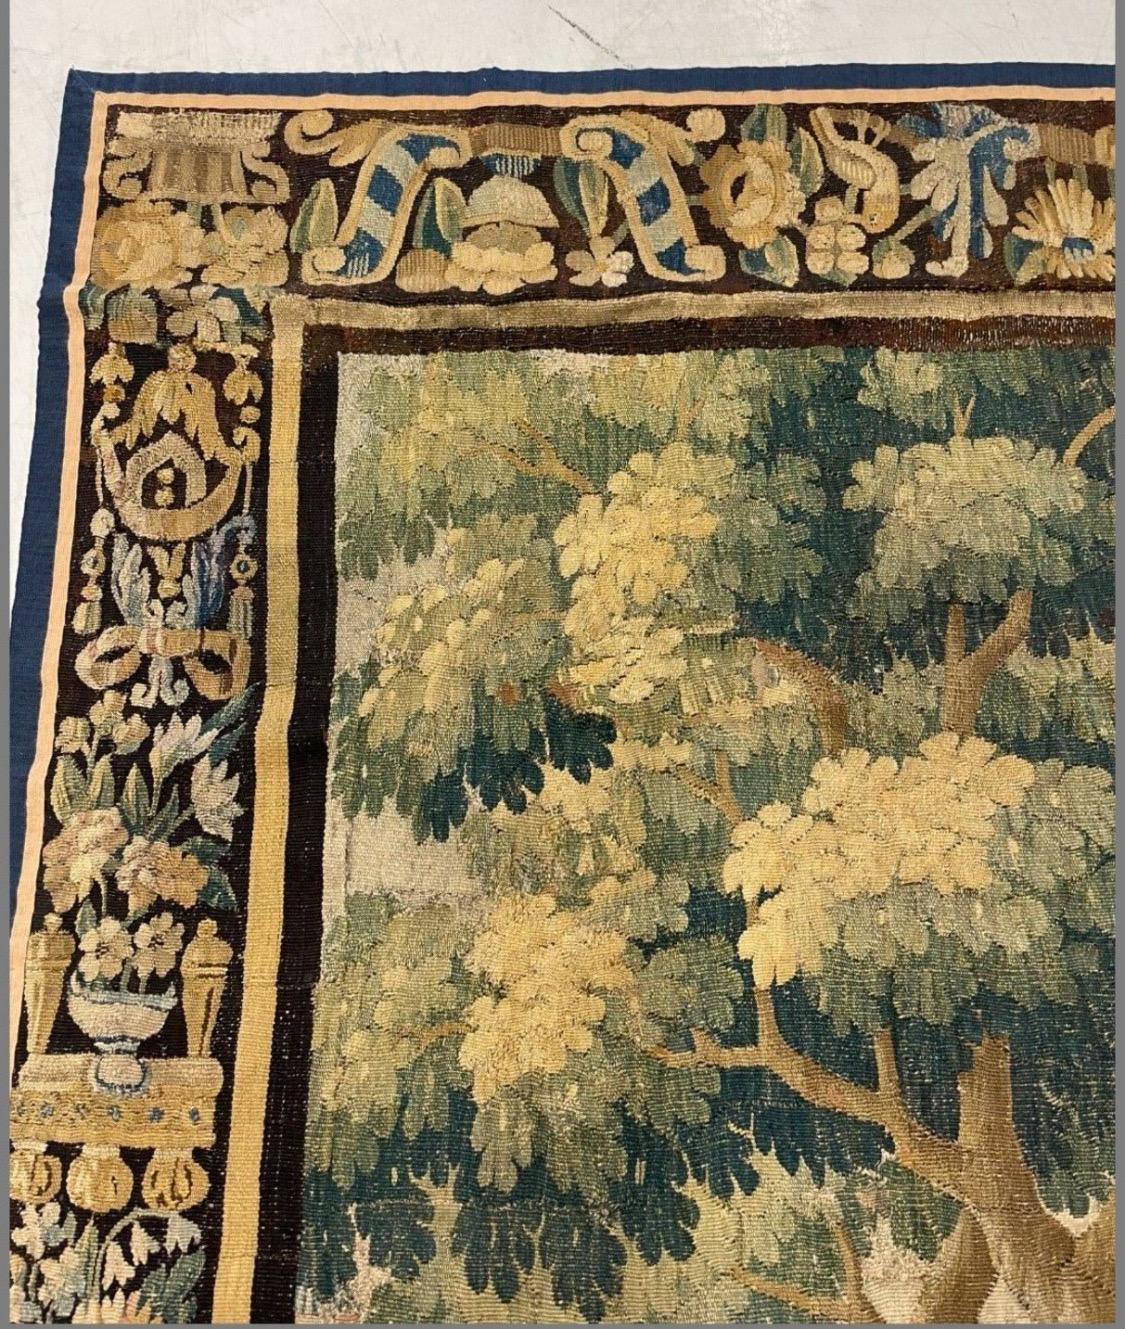 This is a gorgeous antique Early 17th century Flemish Verdure landscape tapestry depicting a beautiful and rich summer scene of a countryside with lush trees and vegetation, and birds with ornate gardens and a castle in the distance. The border